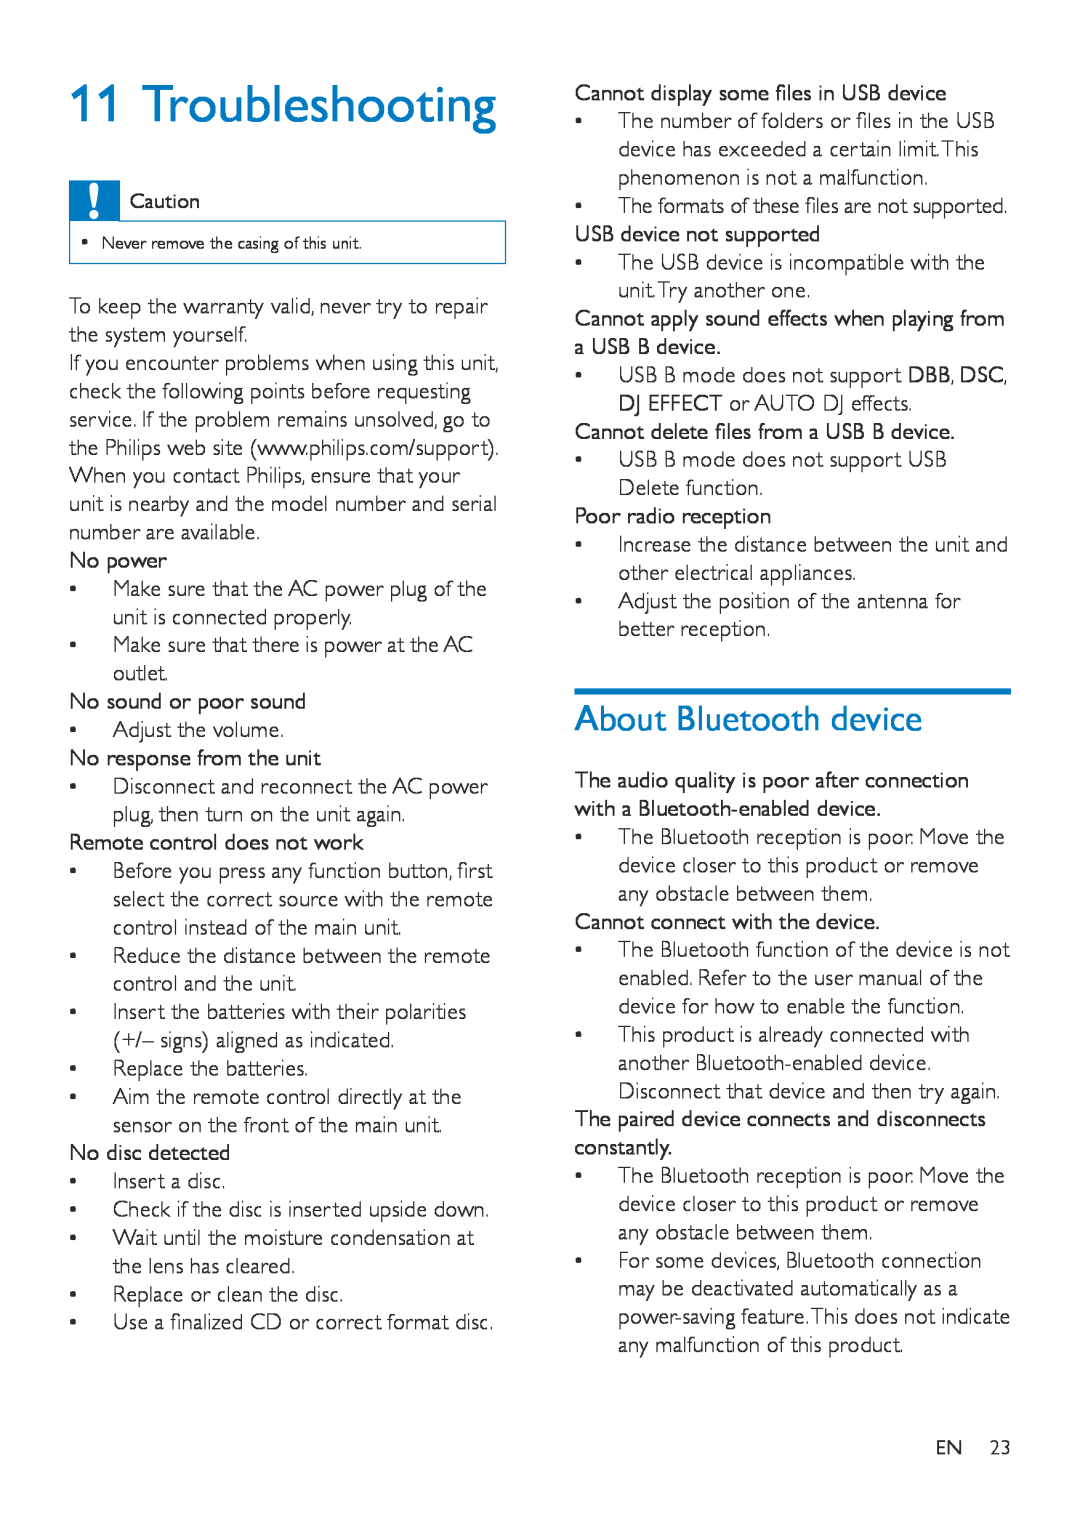 Philips NTRX500 user manual Troubleshooting, About Bluetooth device 